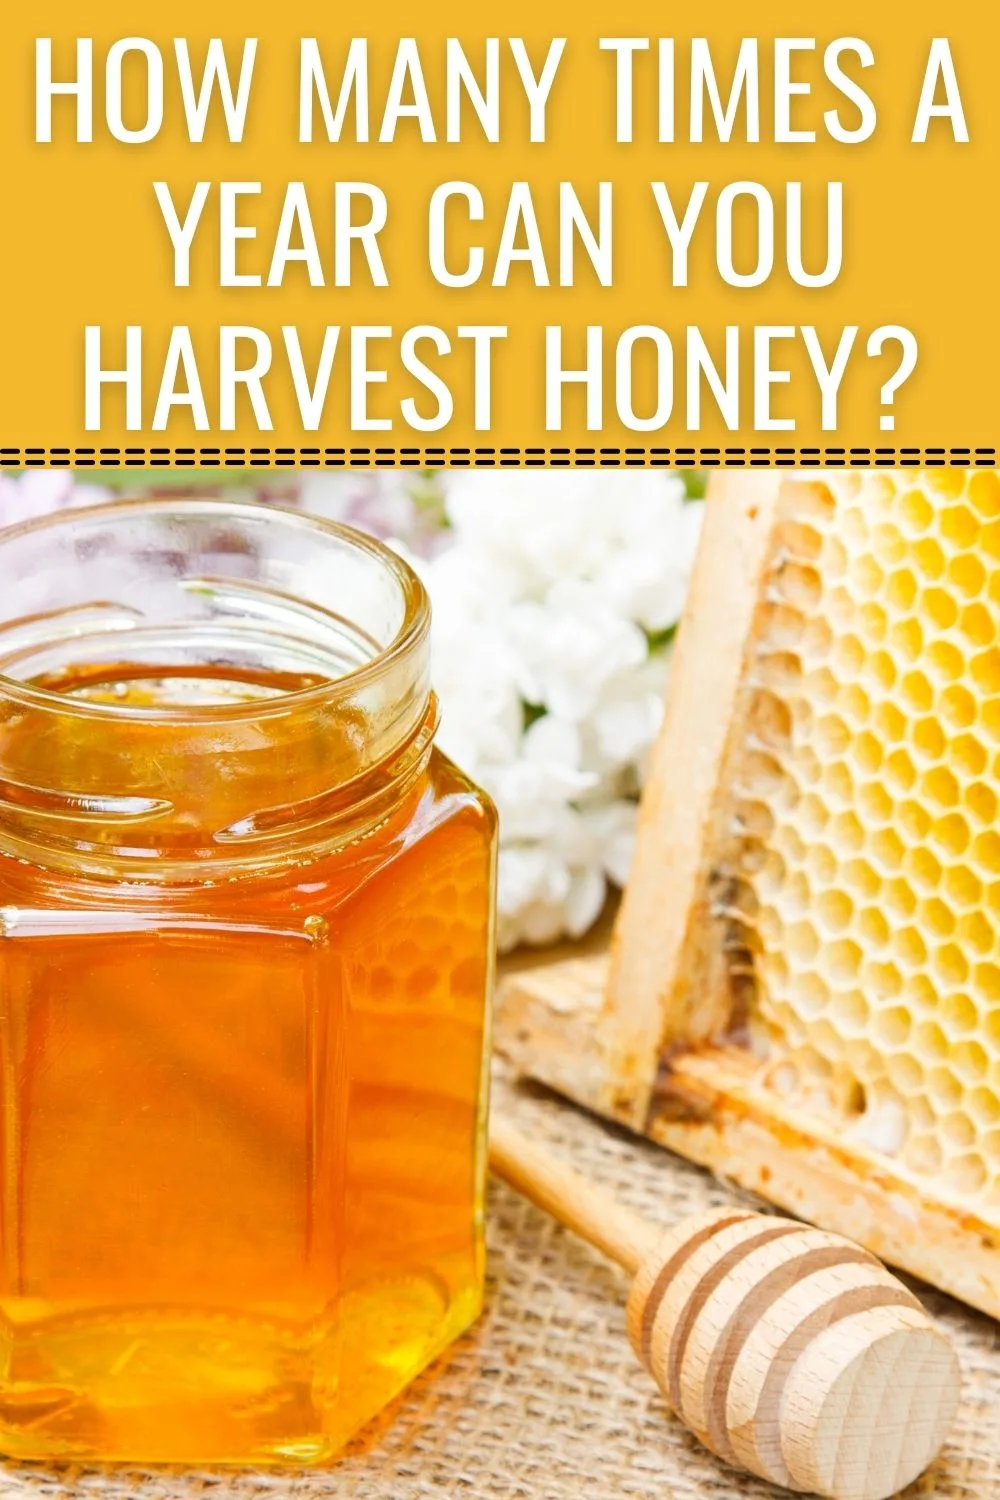 how many times a year can you harvest honey?